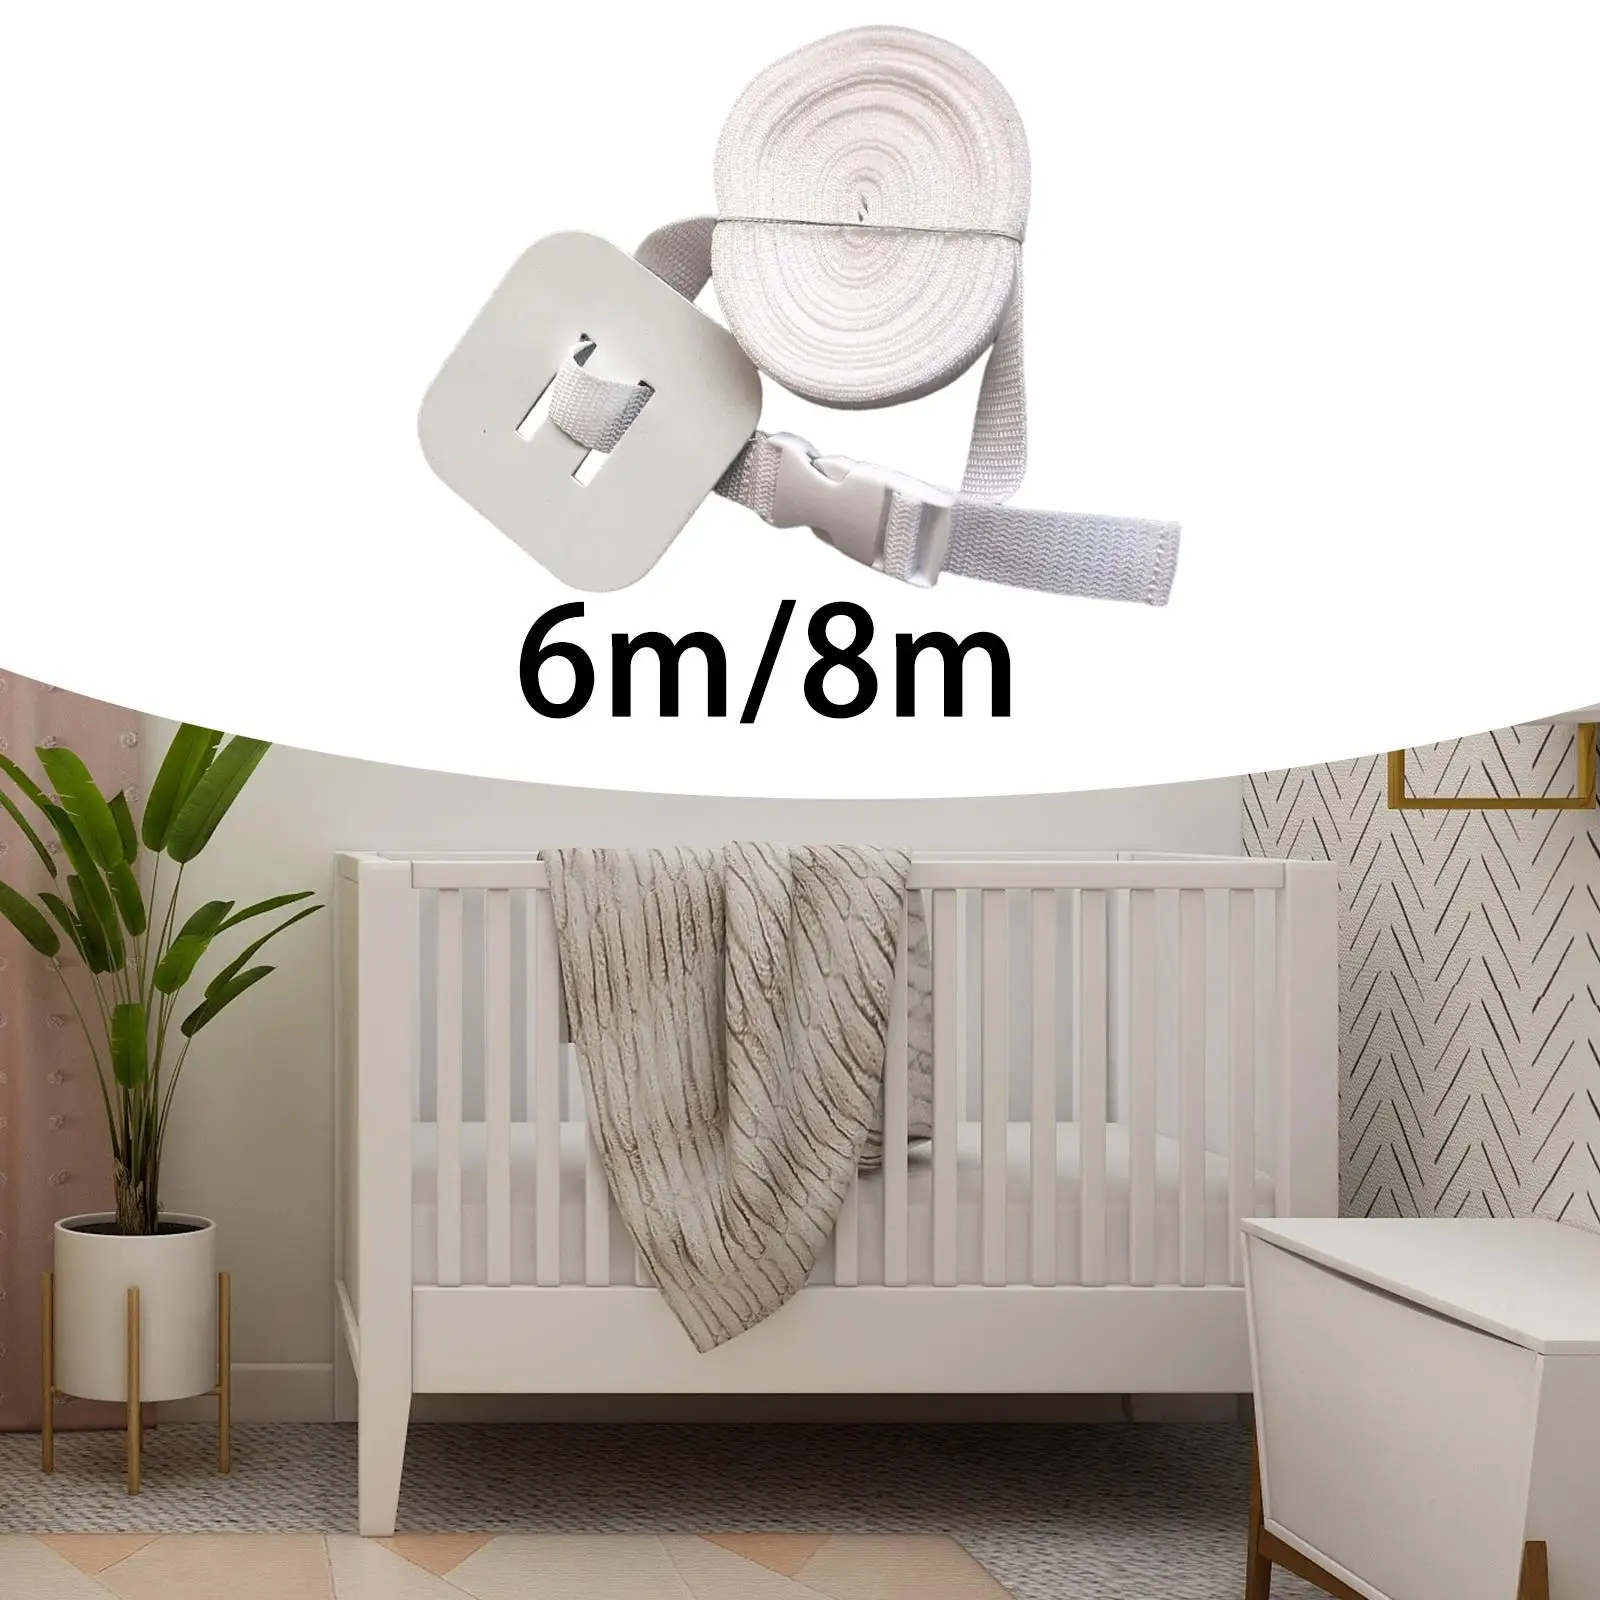 Long Bed Connector Strap Home Textiles Accessories for Sheet Bed Mattress